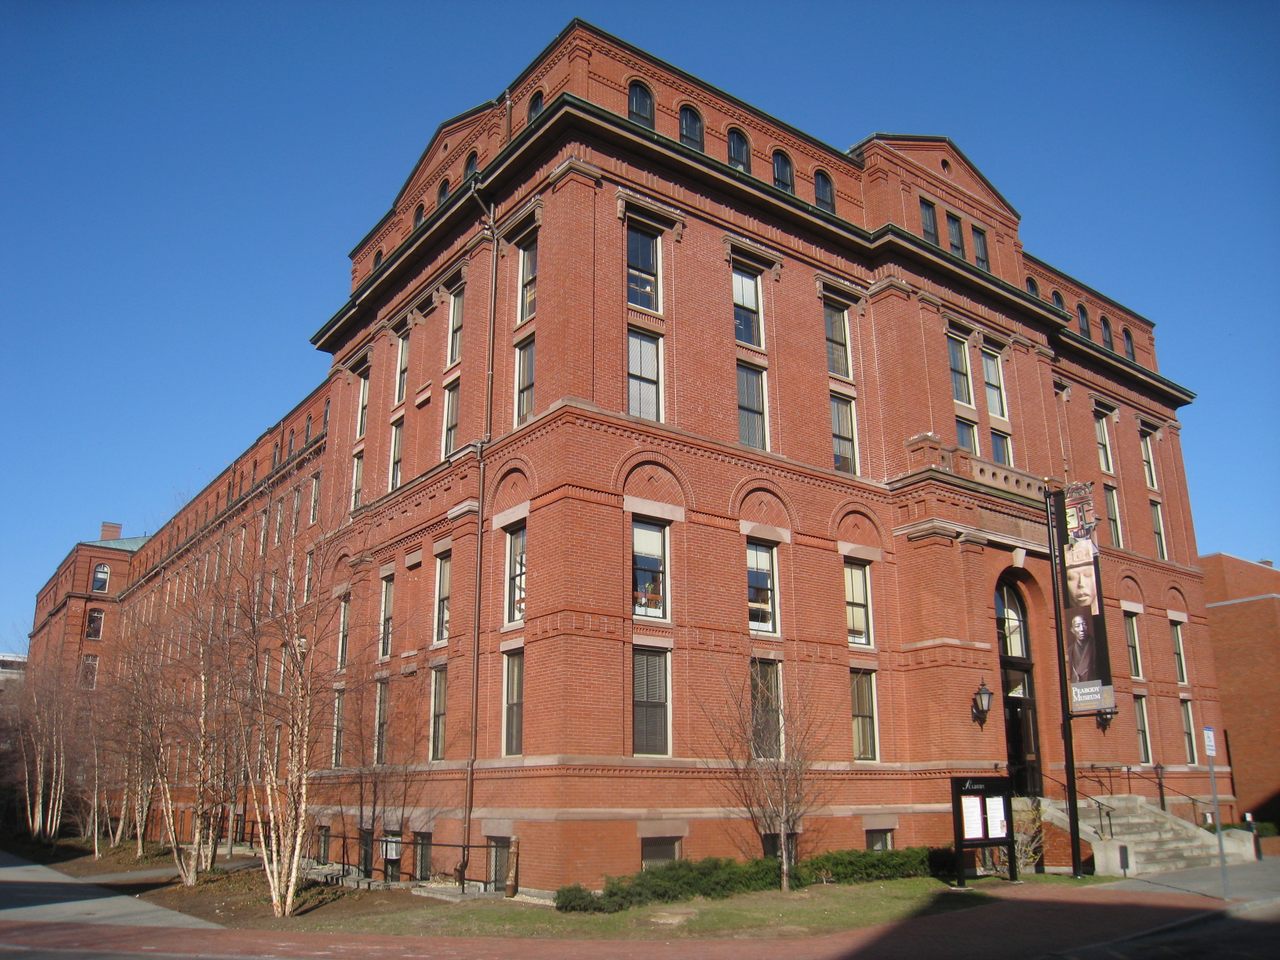 Harvard's Peabody Museum of Archaeology and Ethnology is one of several American museums whose collections include the remains of Black people.